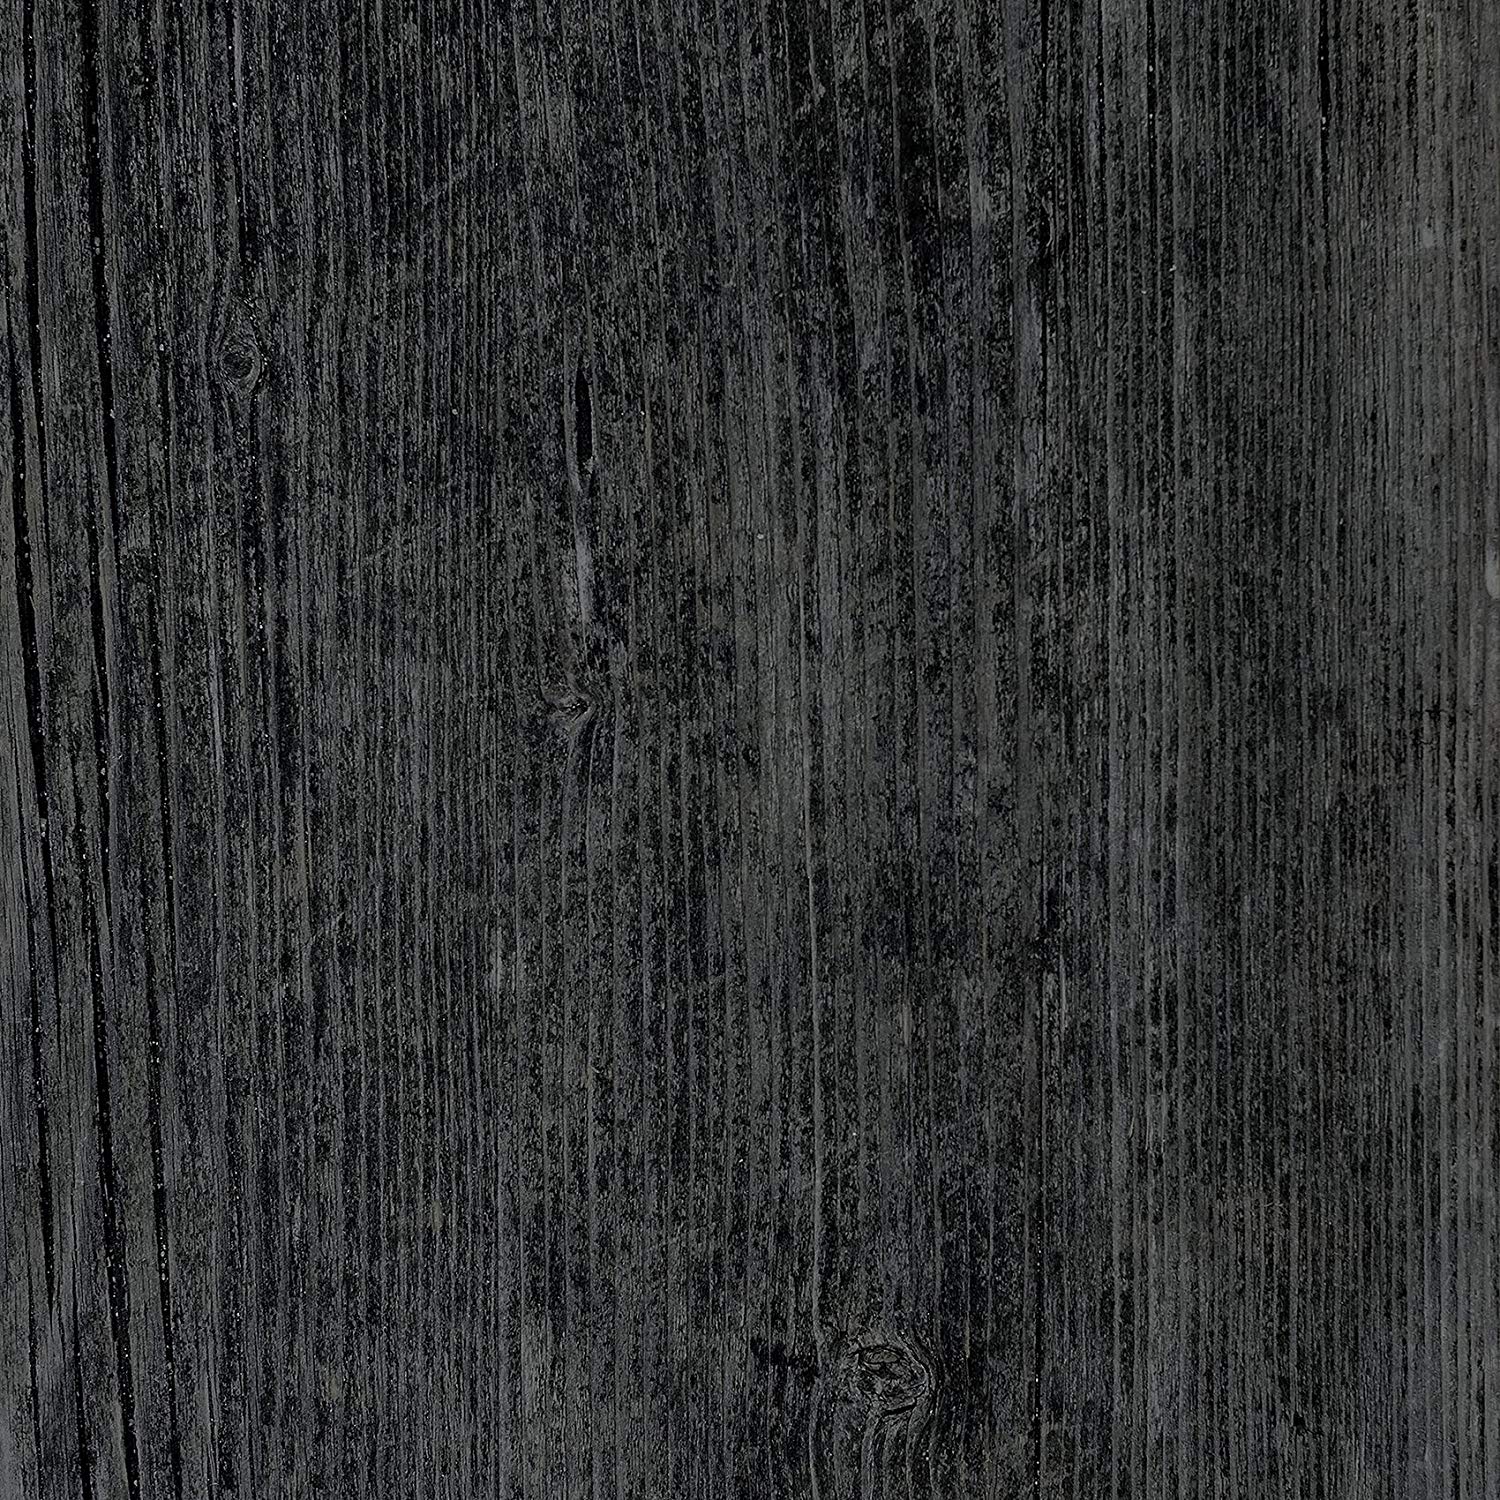 Rustic Distressed Wood Backdrop Photography Background #1785 Black